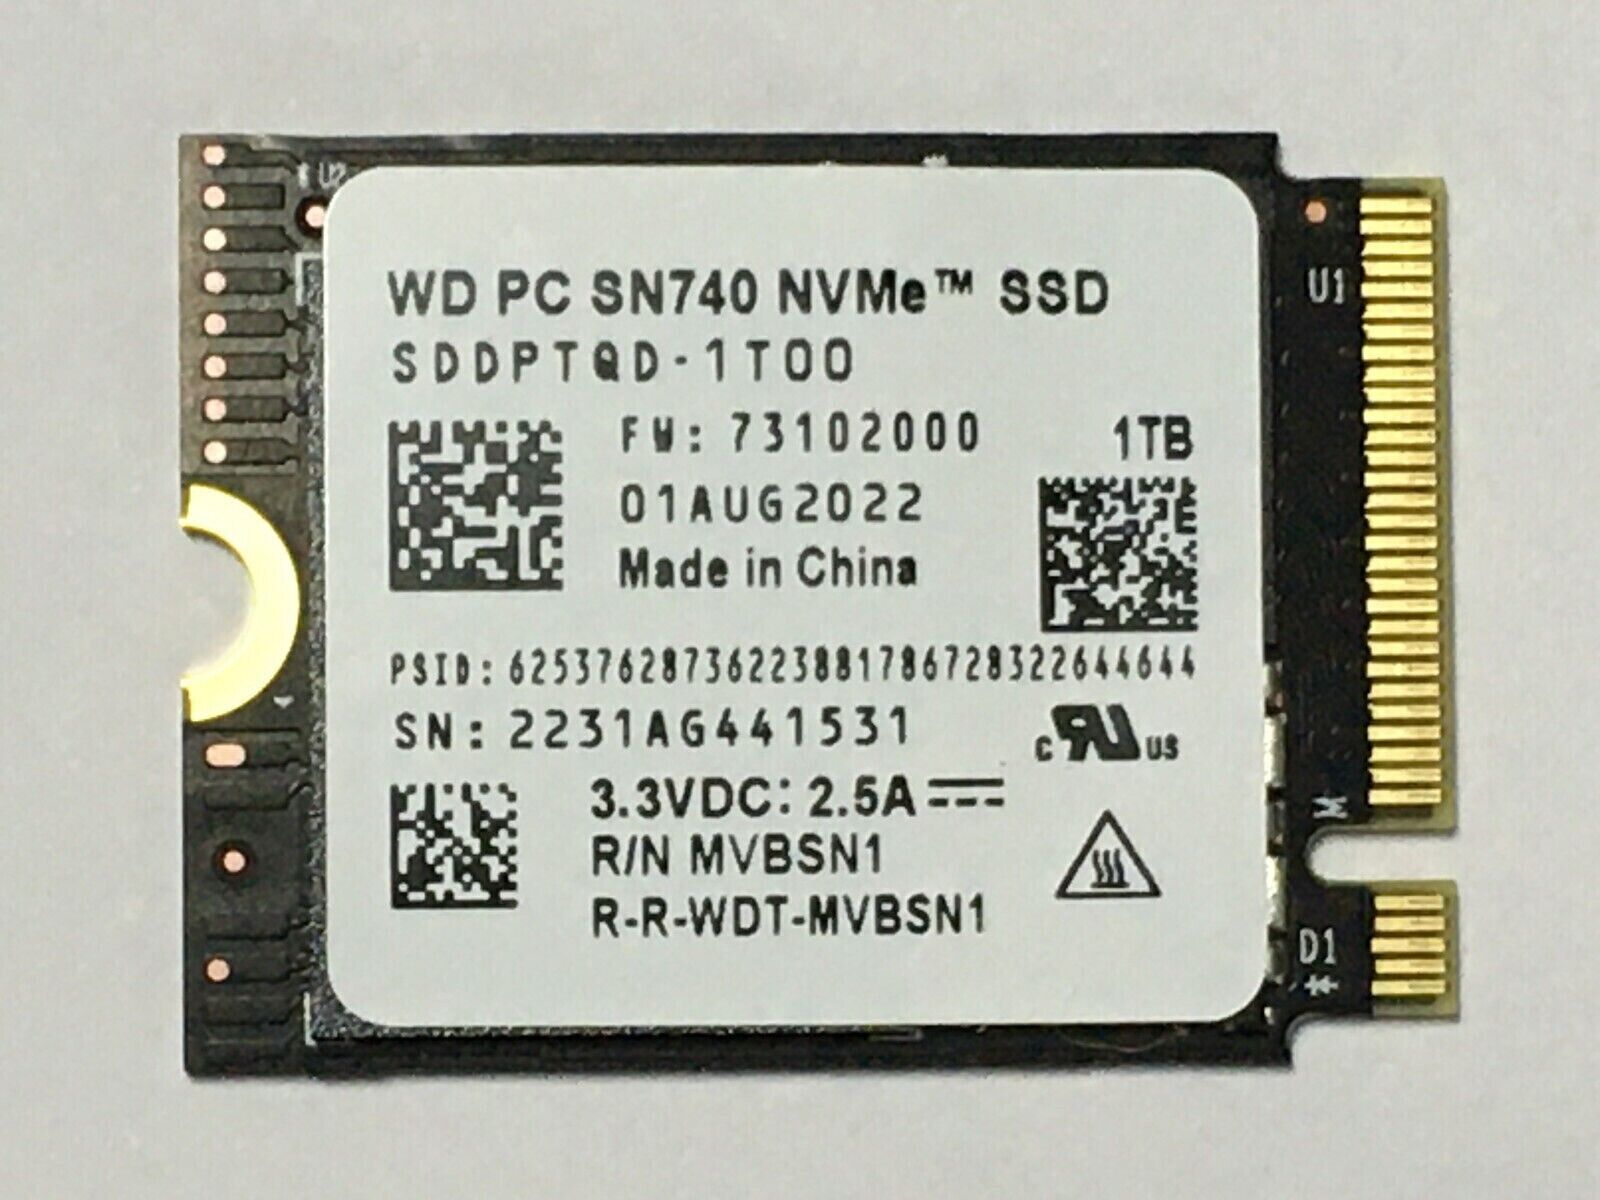 WD SN740 1TB M.2 2230 SSD NVMe PCIe For Steam Deck ASUS ROG Flow Surface Pro 7+